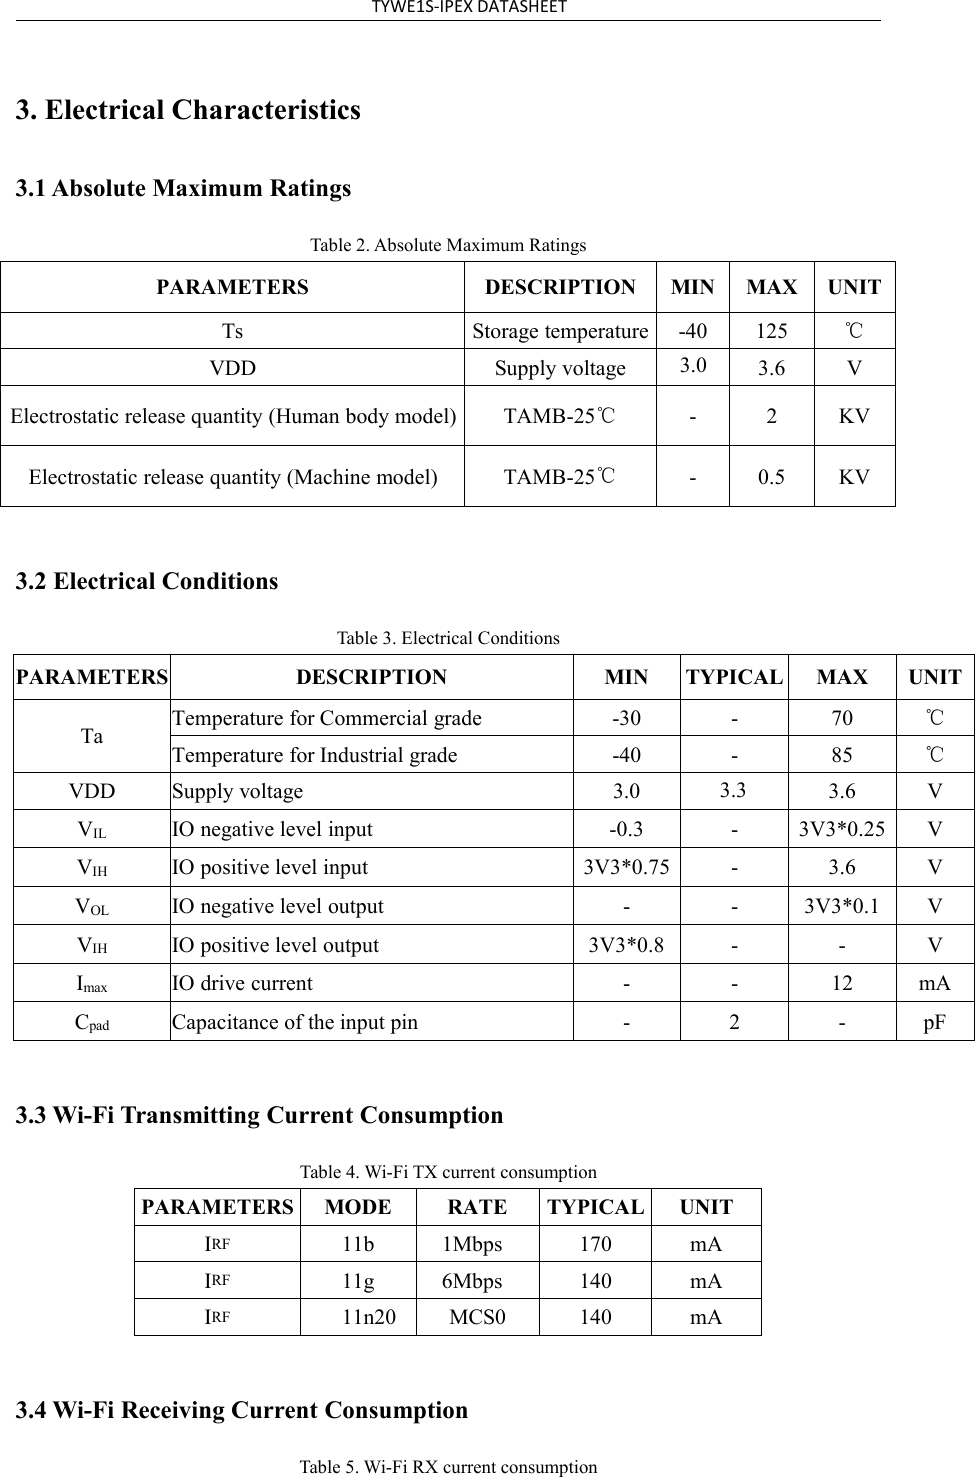 TYWE1S-IPEX DATASHEET3. Electrical Characteristics3.1 Absolute Maximum RatingsTable 2. Absolute Maximum RatingsPARAMETERSDESCRIPTIONMINMAXUNITTsStorage temperature-40125℃VDDSupply voltage3.03.6VElectrostatic release quantity (Human body model)TAMB-25℃-2KVElectrostatic release quantity (Machine model)TAMB-25℃-0.5KV3.2 Electrical ConditionsTable 3. Electrical ConditionsPARAMETERSDESCRIPTIONMINTYPICALMAXUNITTaTemperature for Commercial grade-30-70℃Temperature for Industrial grade-40-85℃VDDSupply voltage3.03.33.6VVILIO negative level input-0.3-3V3*0.25VVIHIO positive level input3V3*0.75-3.6VVOLIO negative level output--3V3*0.1VVIHIO positive level output3V3*0.8--VImaxIO drive current--12mACpadCapacitance of the input pin-2-pF3.3 Wi-Fi Transmitting Current ConsumptionTable 4. Wi-Fi TX current consumptionPARAMETERSMODERATETYPICALUNITIRF11b1Mbps170mAIRF11g6Mbps140mAIRF11n20 MCS0140mA3.4 Wi-Fi Receiving Current ConsumptionTable 5. Wi-Fi RX current consumption